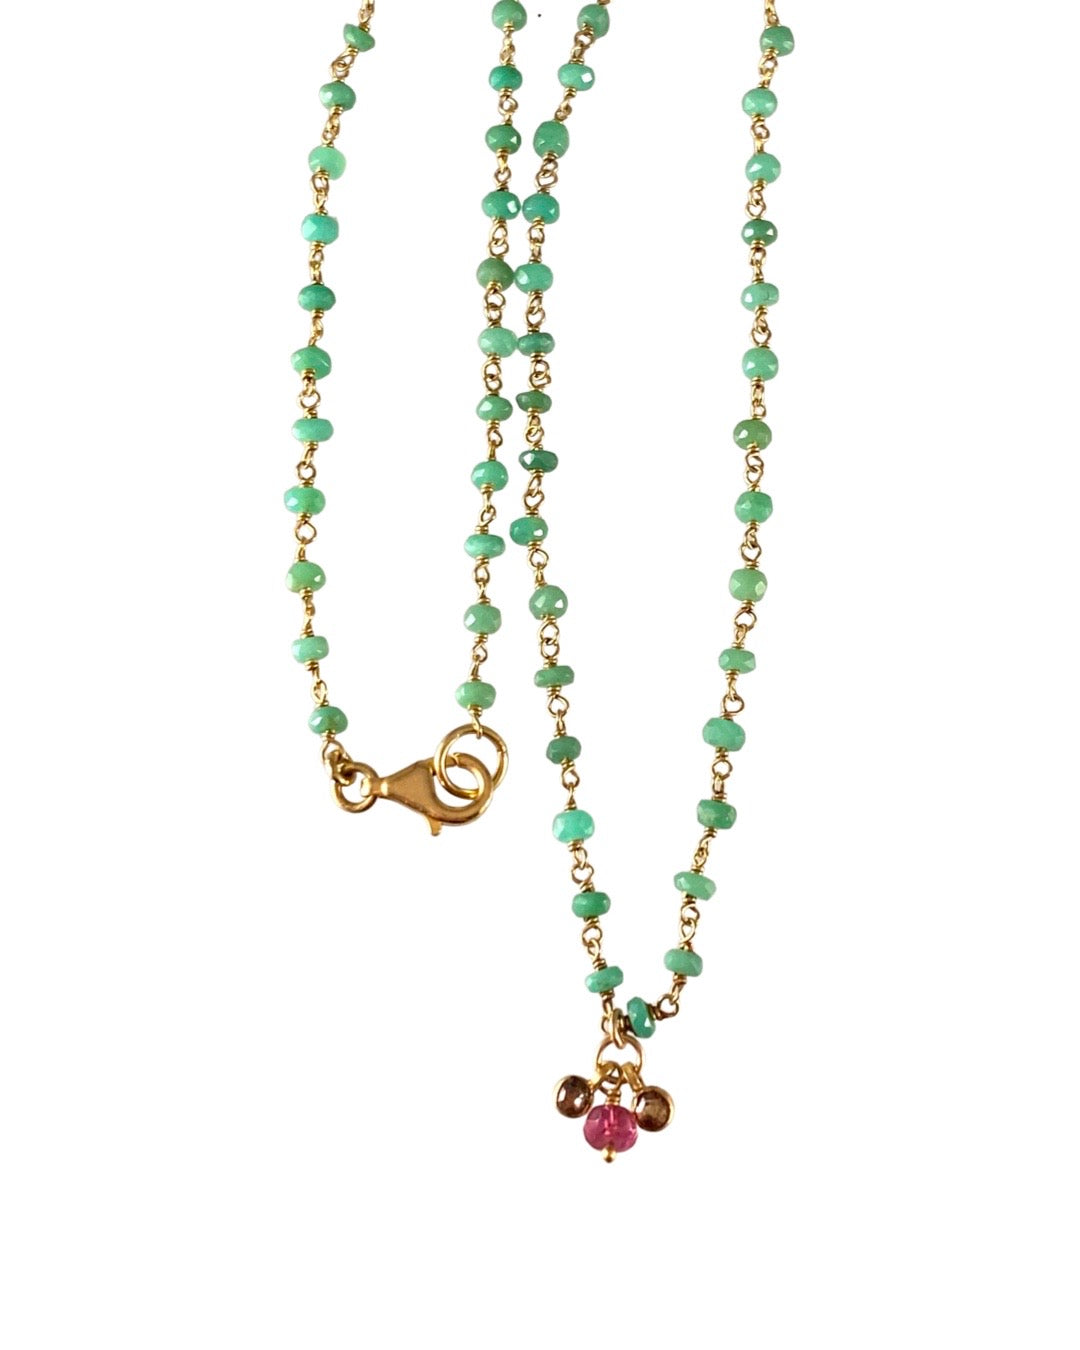 18” 18k Solid Gold Chrysoprase Wrap Charm Necklace